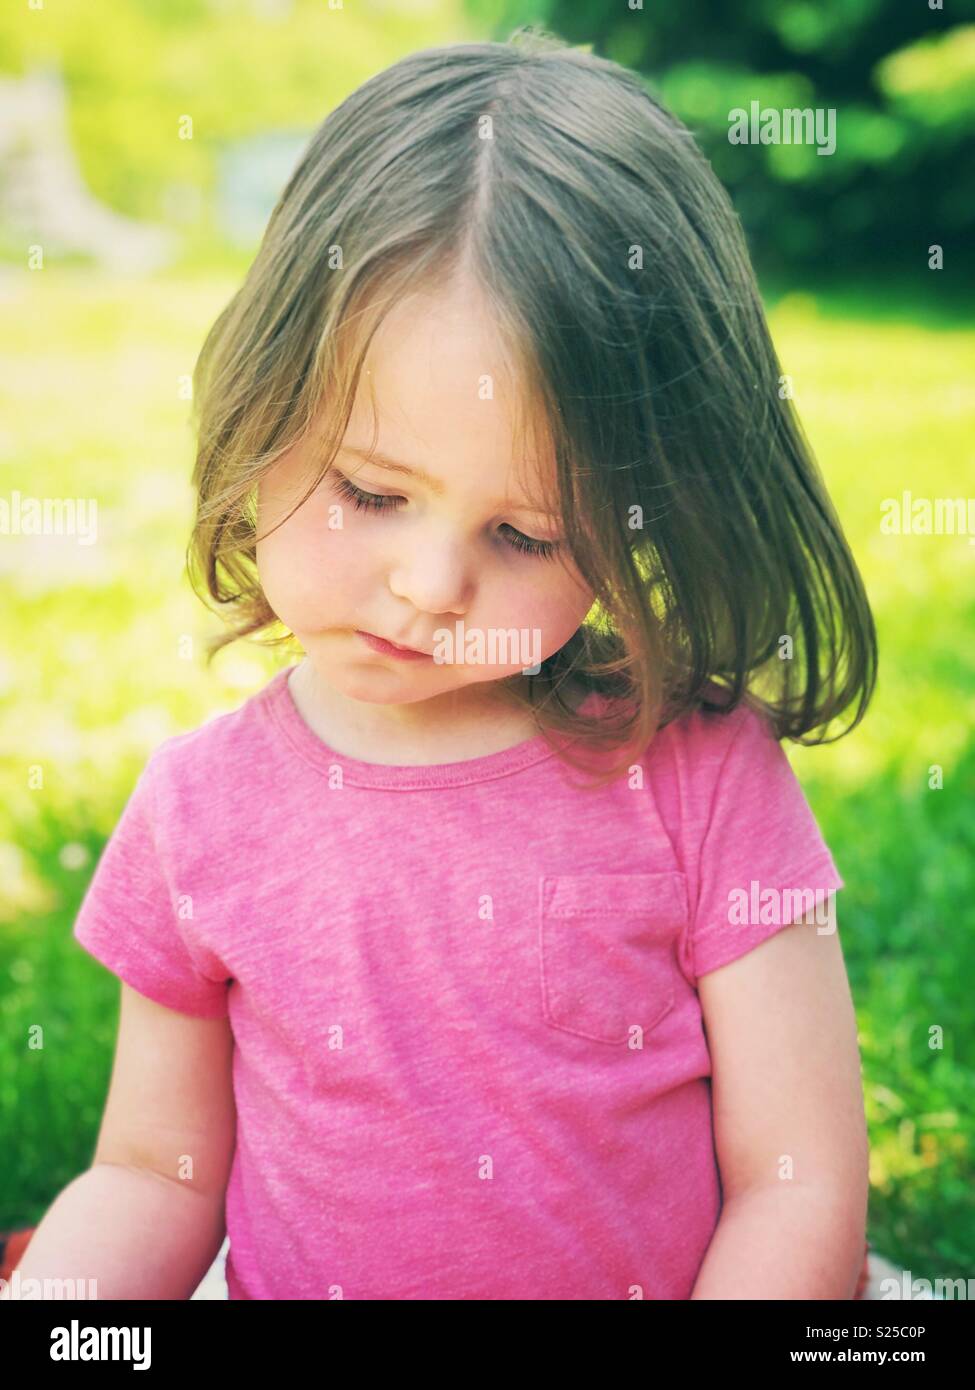 Candid portrait of 2 year old toddler child sitting outside on a sunny day Stock Photo